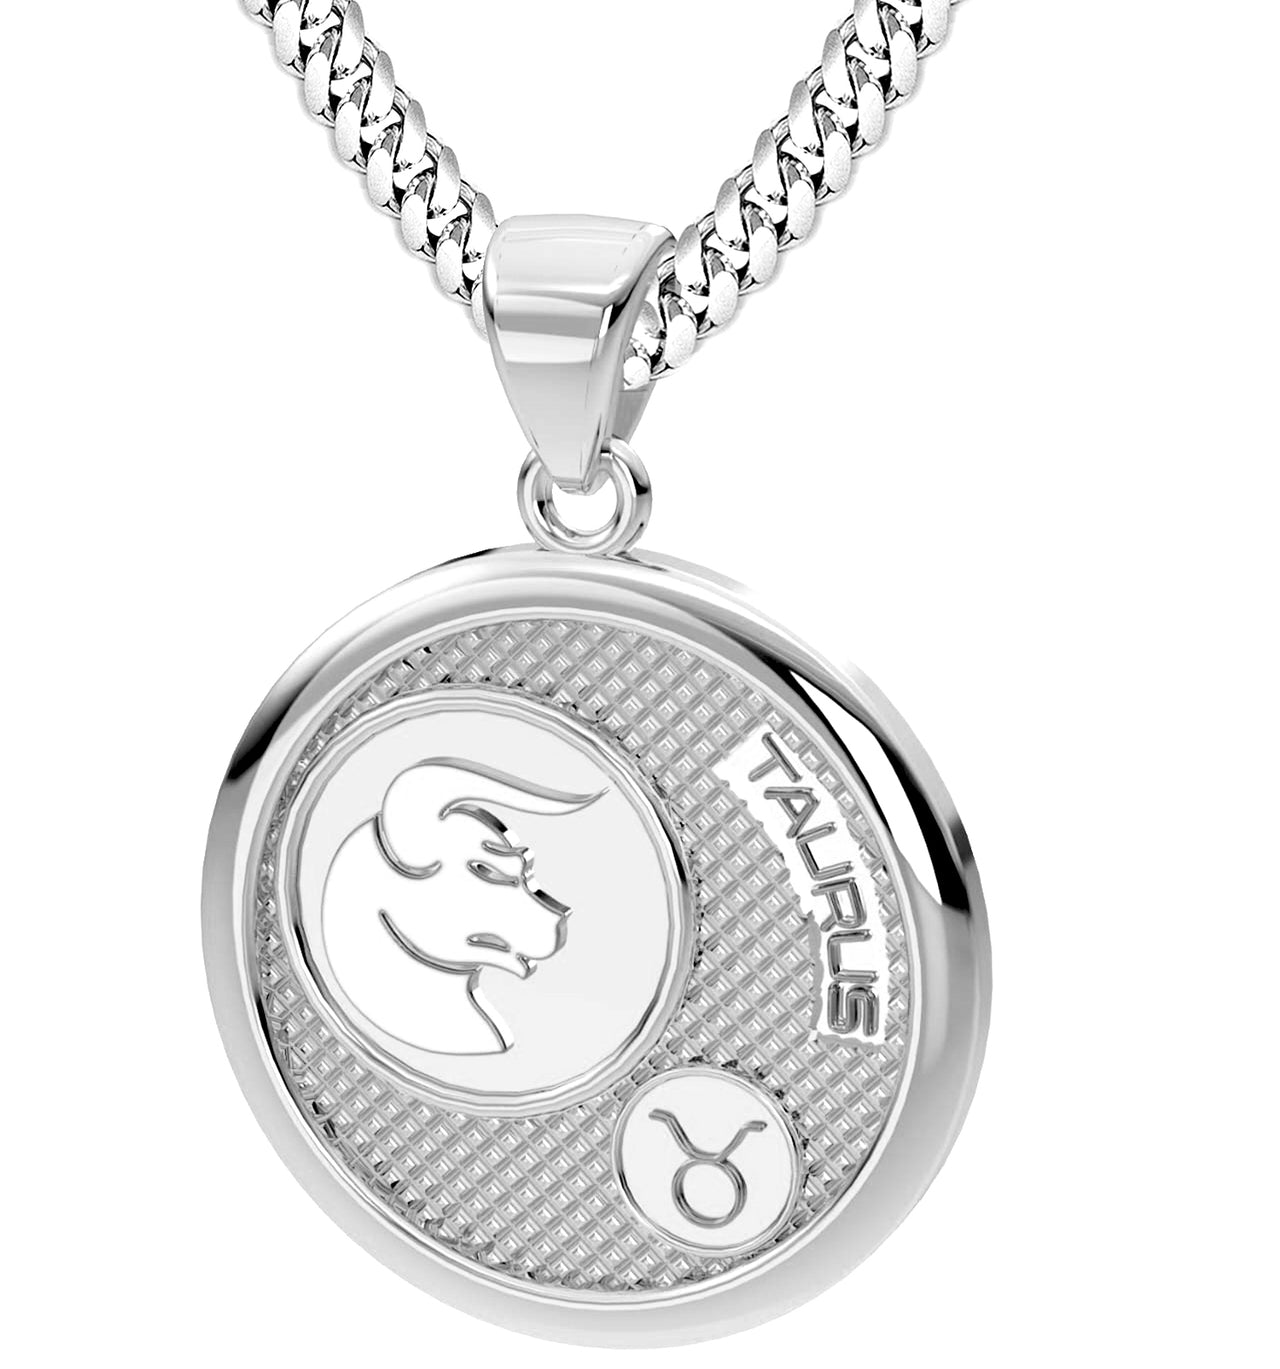 Men's 925 Sterling Silver Round Taurus Zodiac Polished Finish Pendant Necklace, 33mm